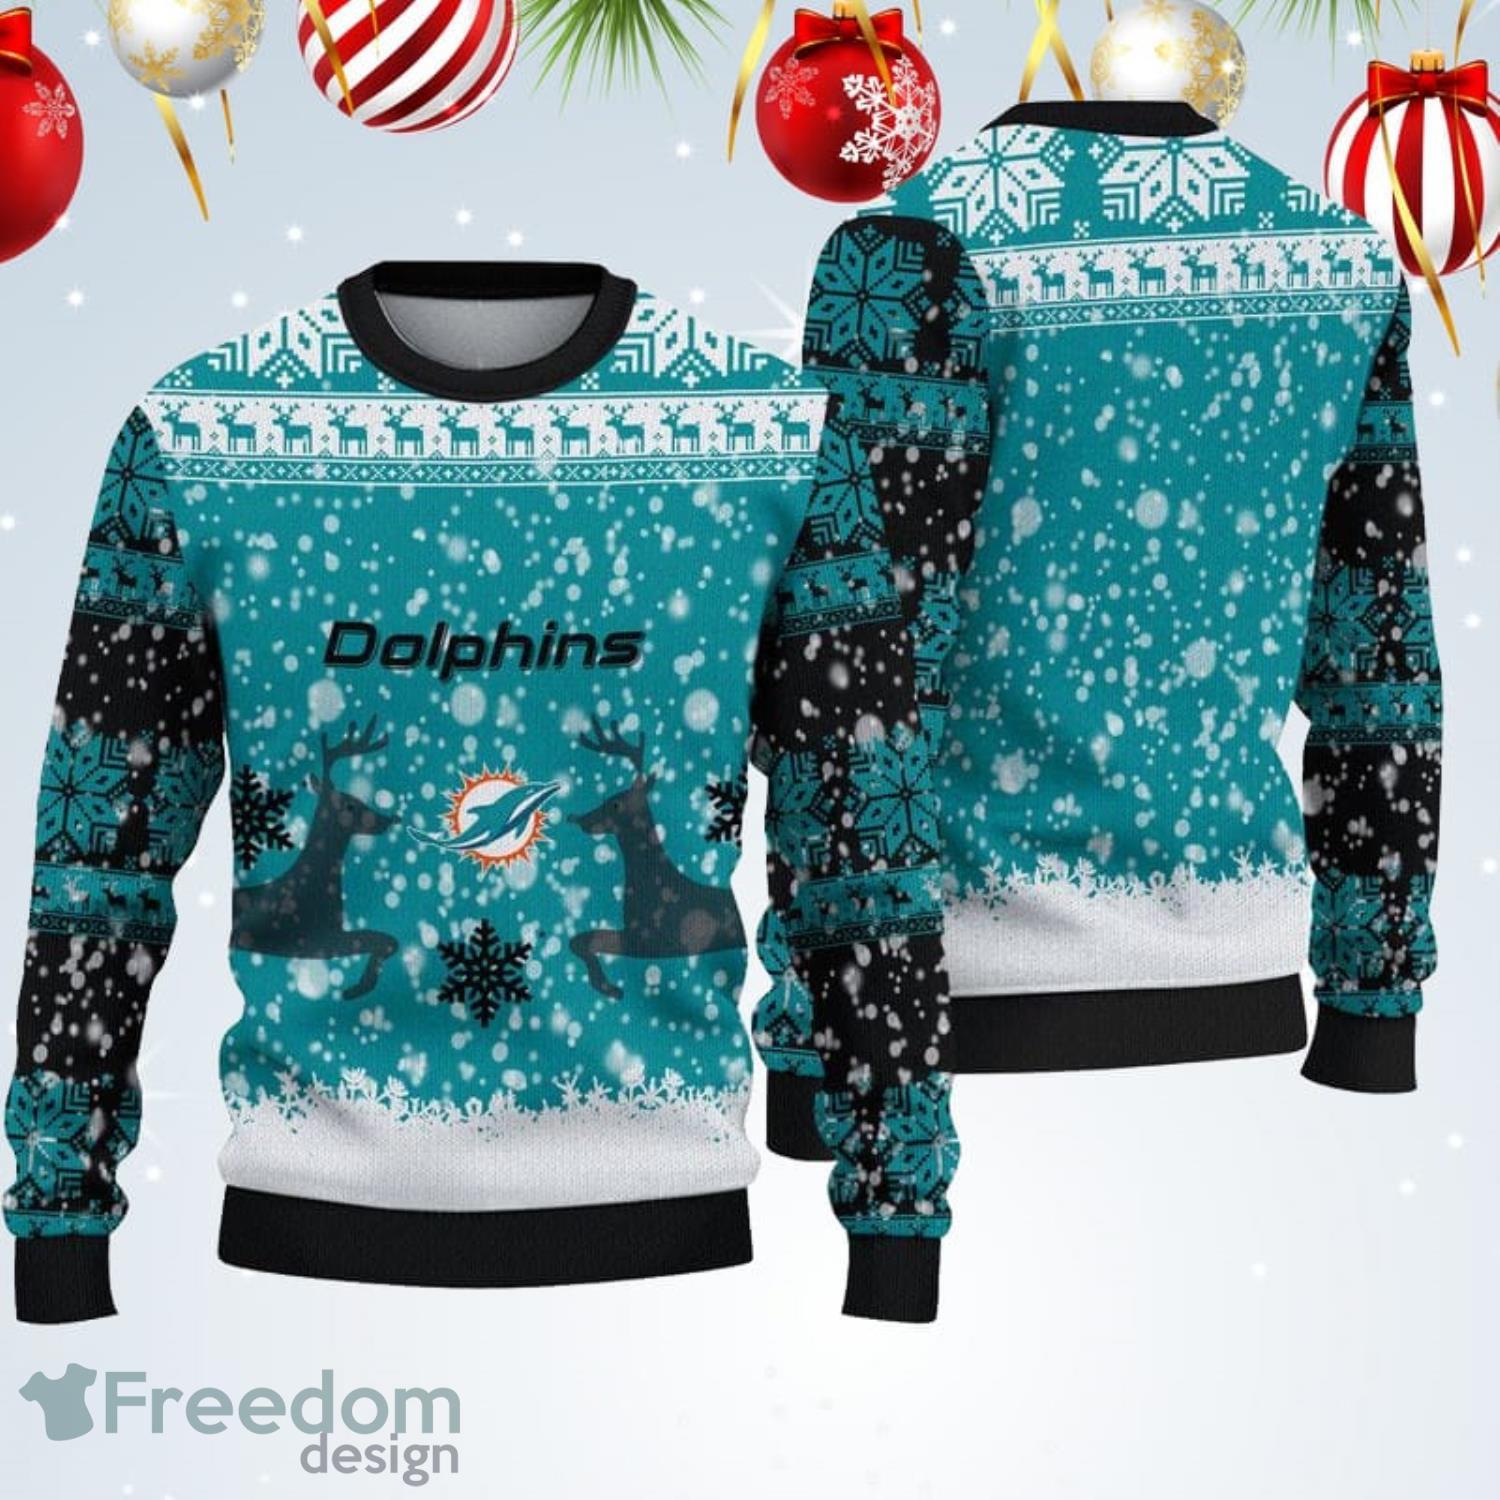 miami dolphins light up sweater